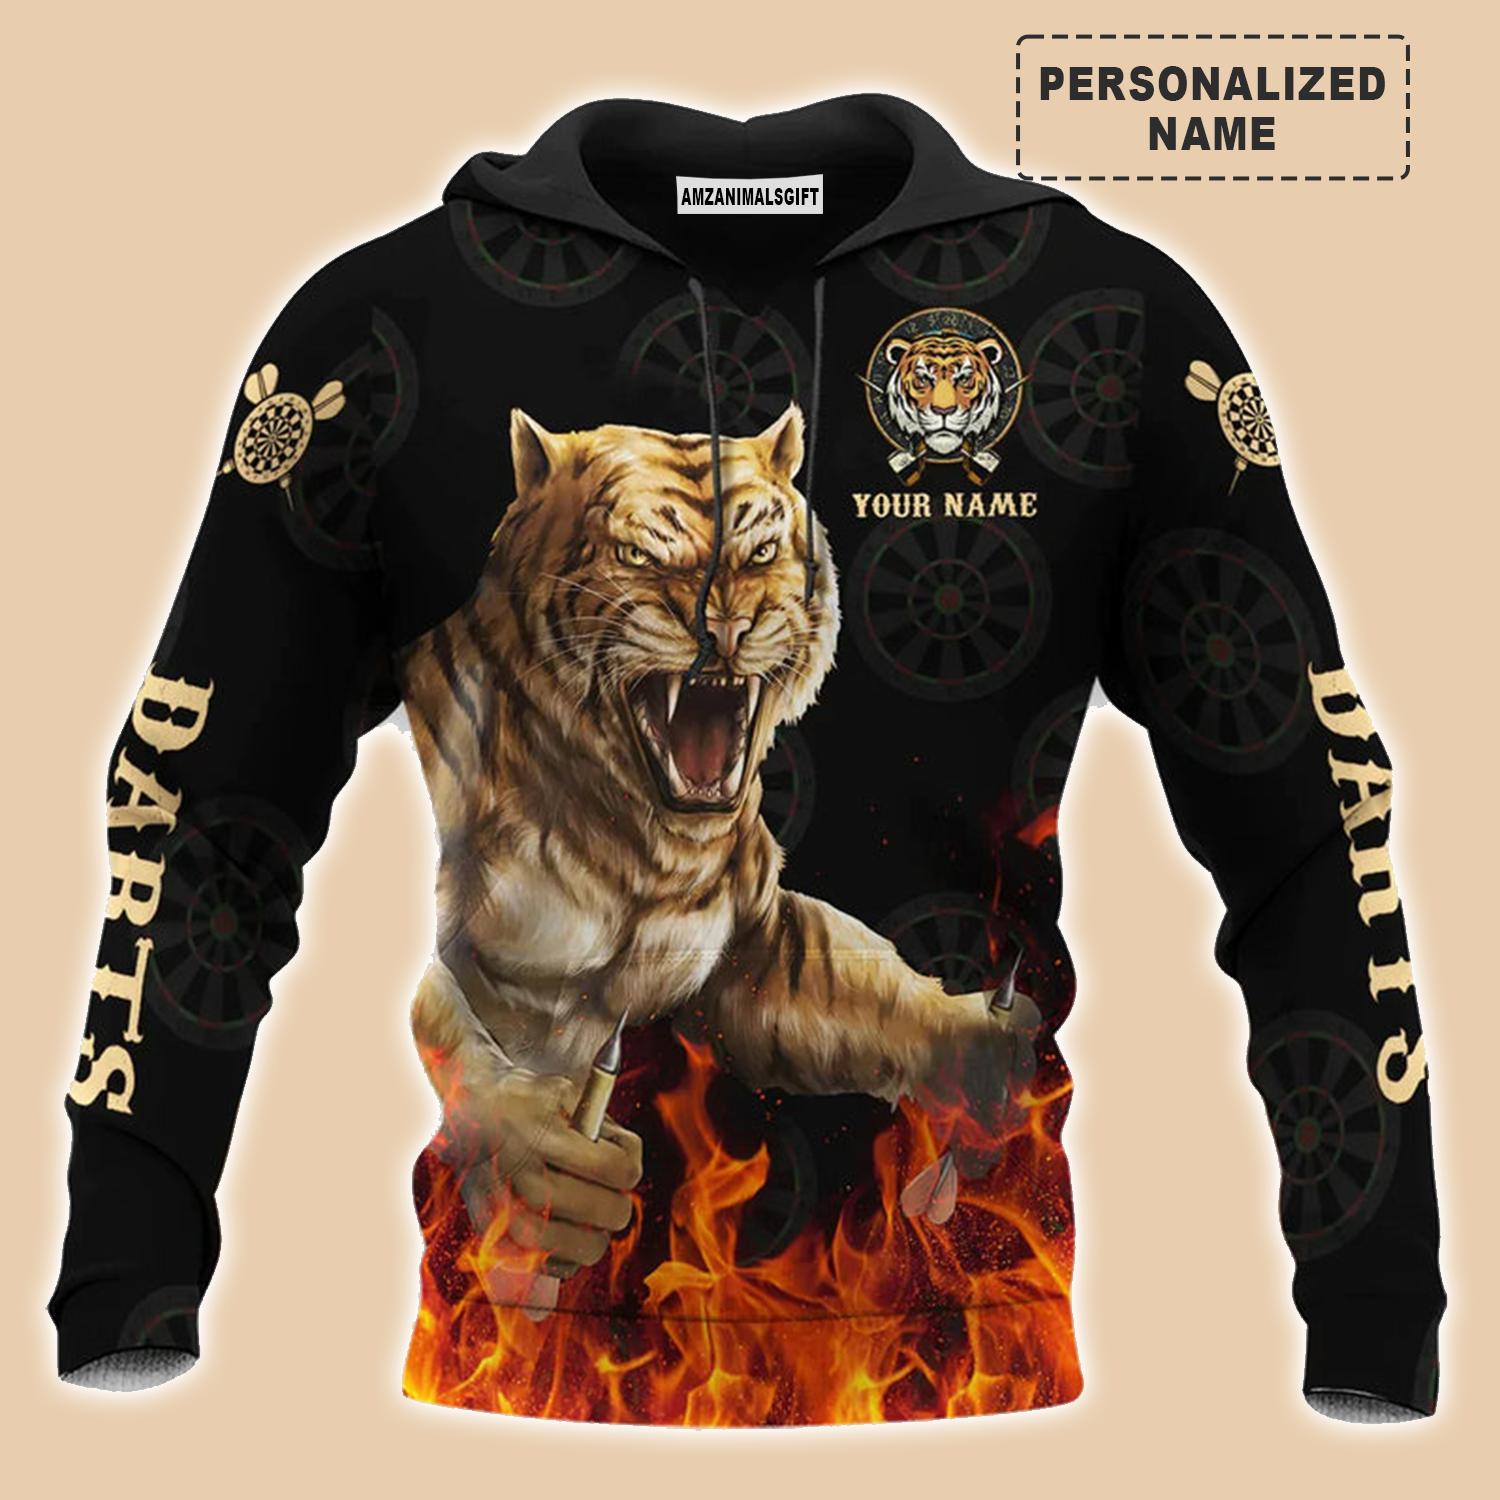 Darts Tiger Black And Fire Premium Hoodie Customized Name, Perfect Outfit For Darts Players Uniforms, Darts Lovers, Team